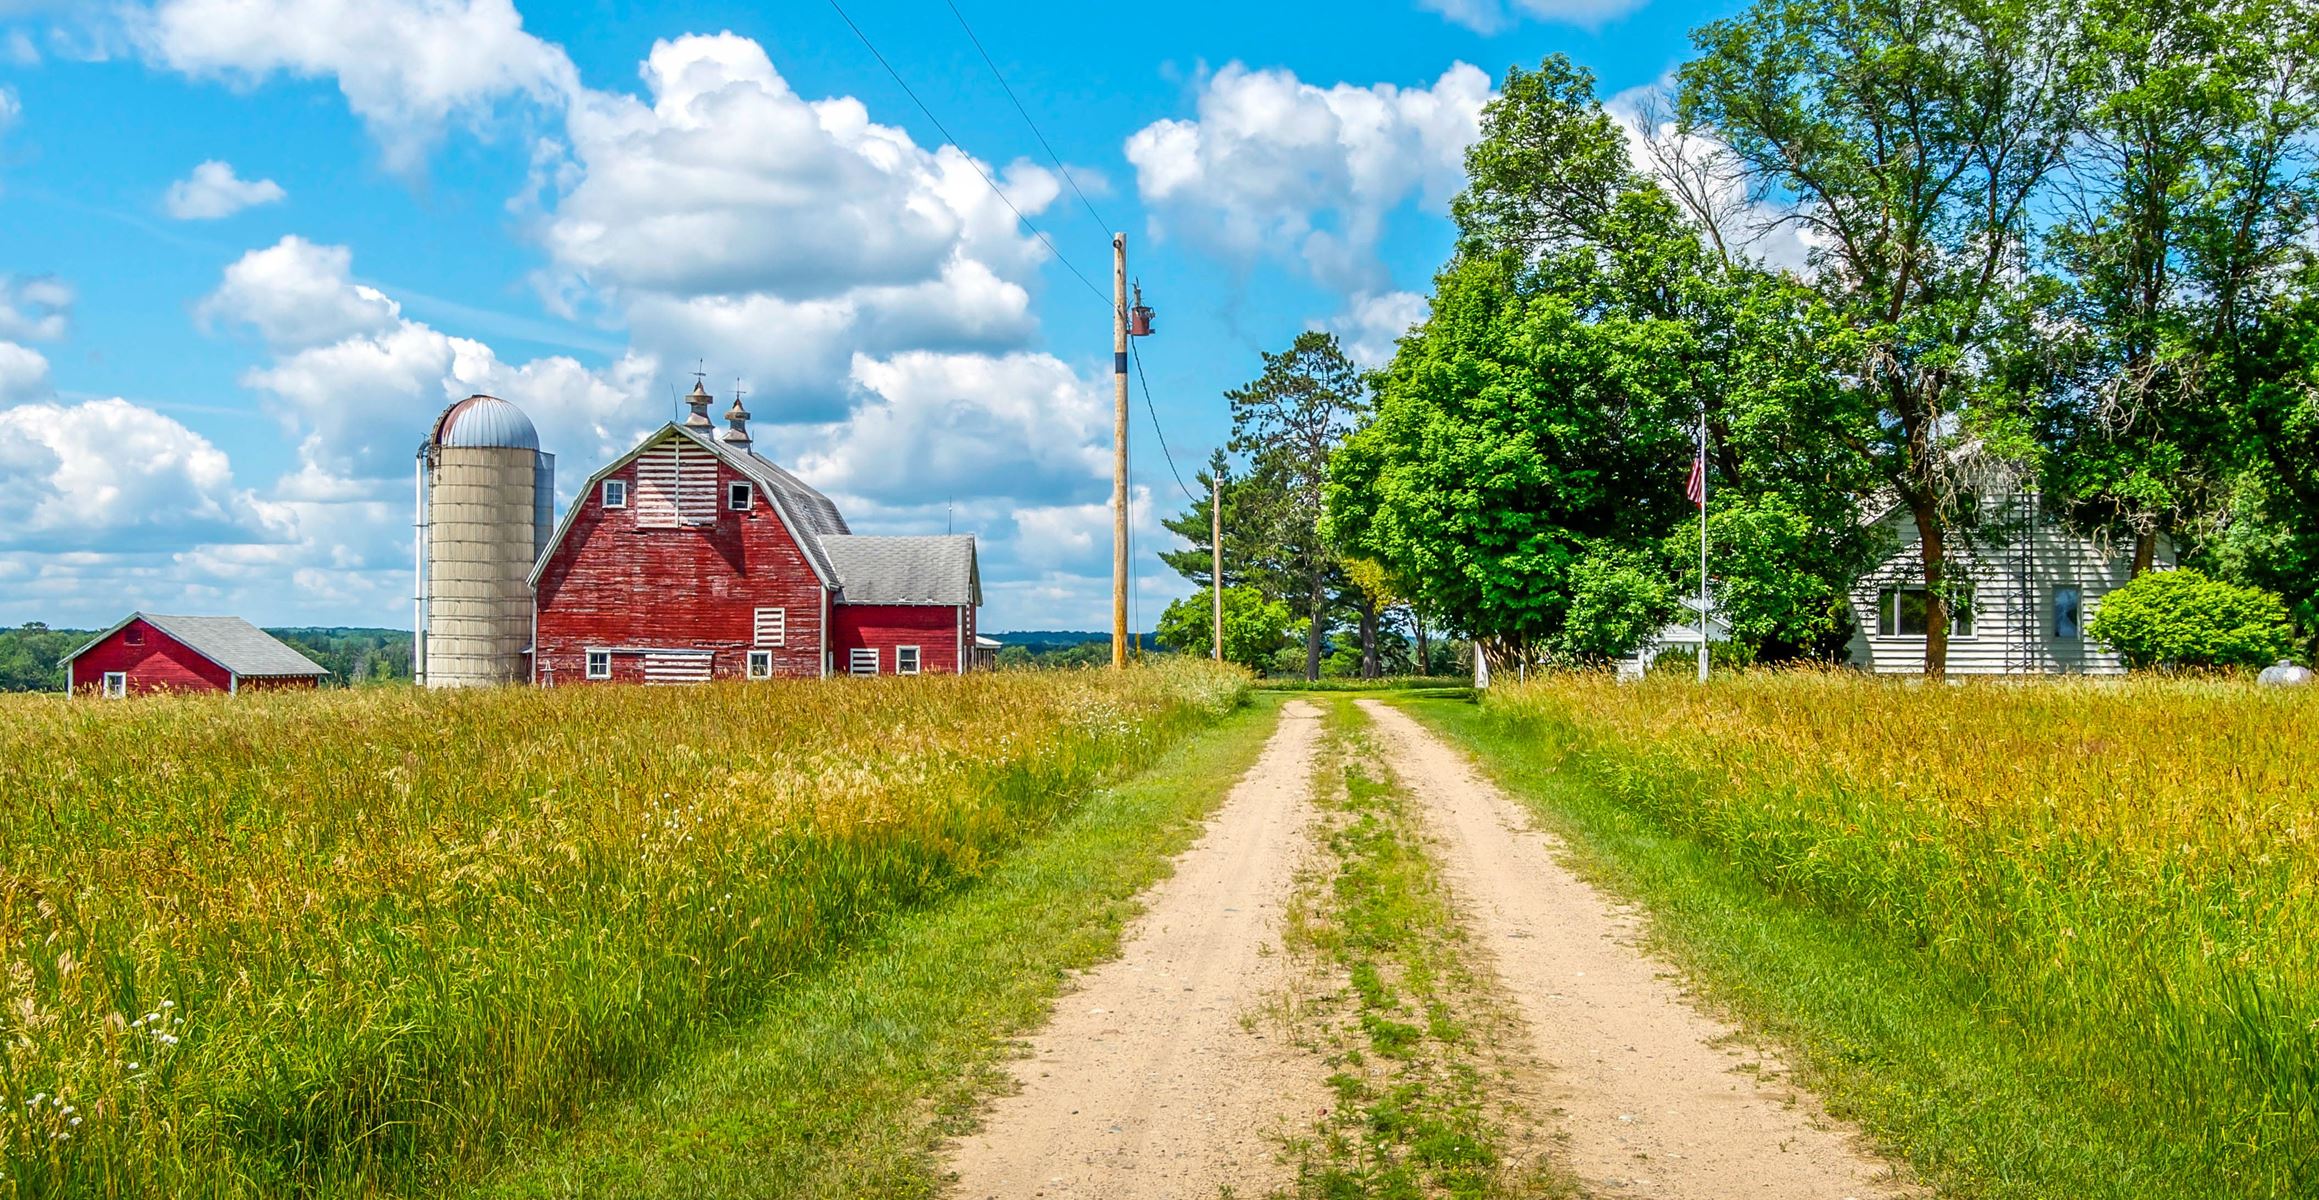 Driveway up to a farm with a red barn and blue sky